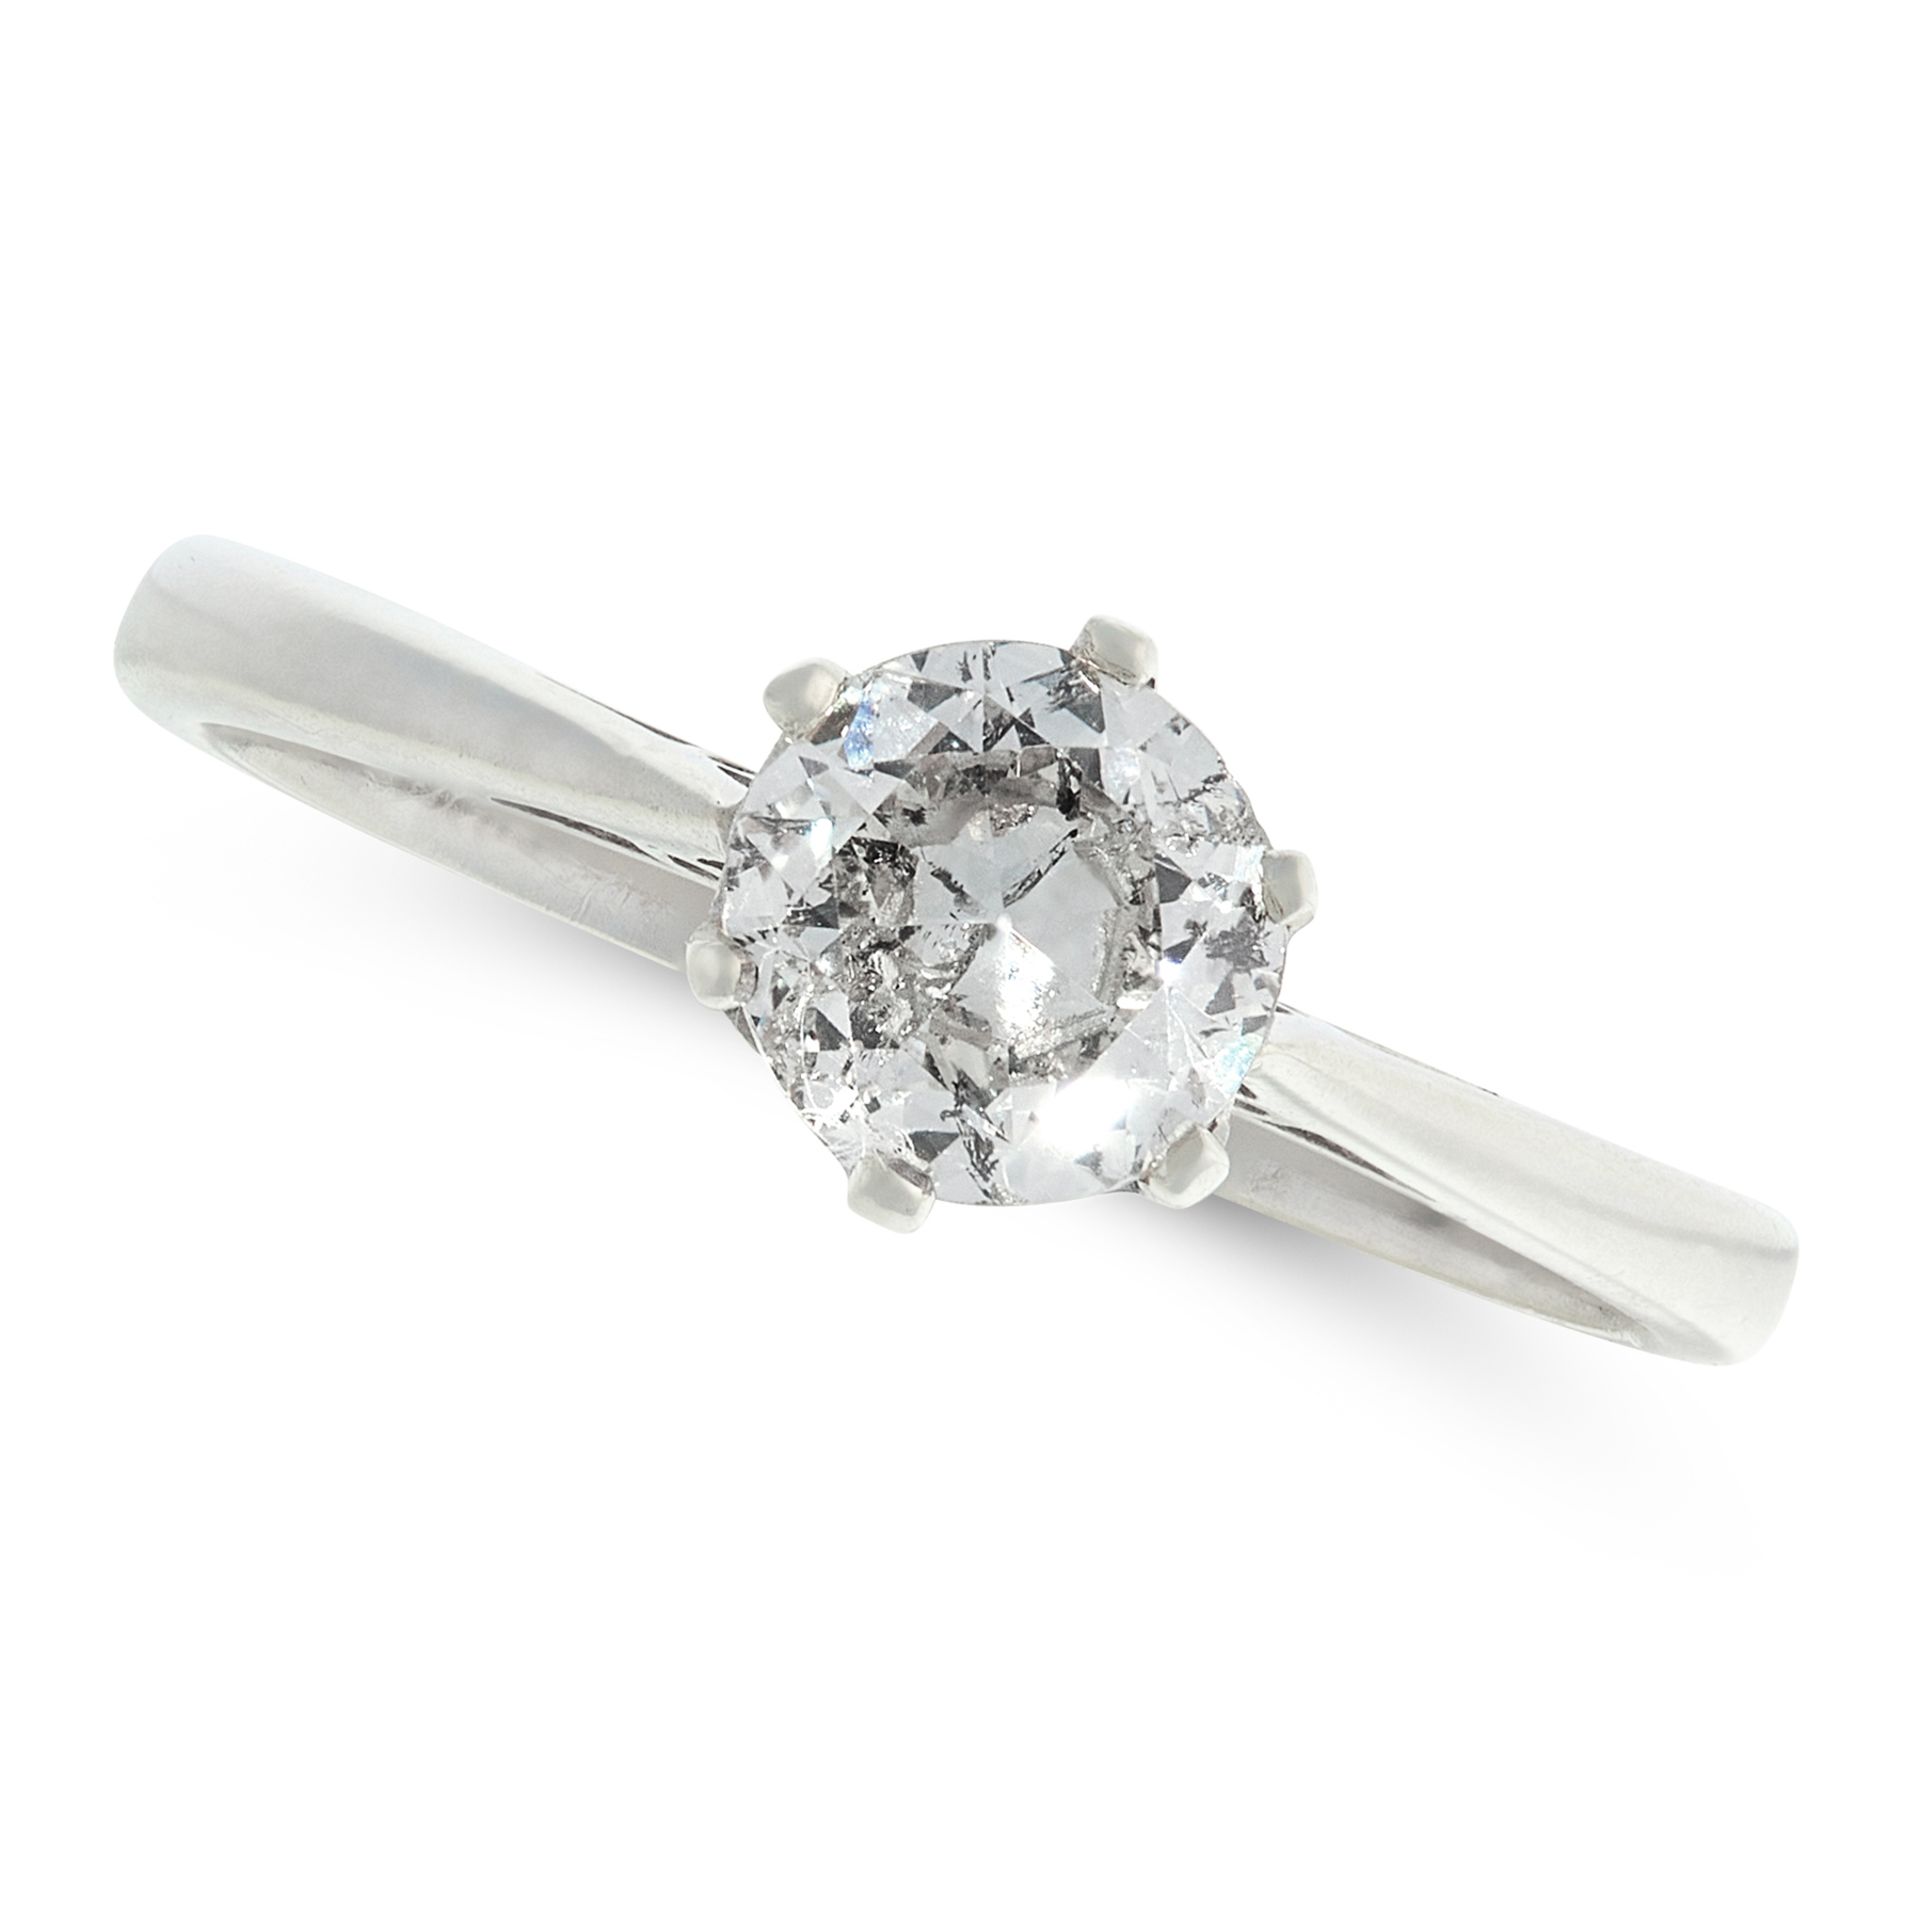 A SOLITAIRE DIAMOND RING set with an old European cut diamond of 0.55 carats to a tapering band,